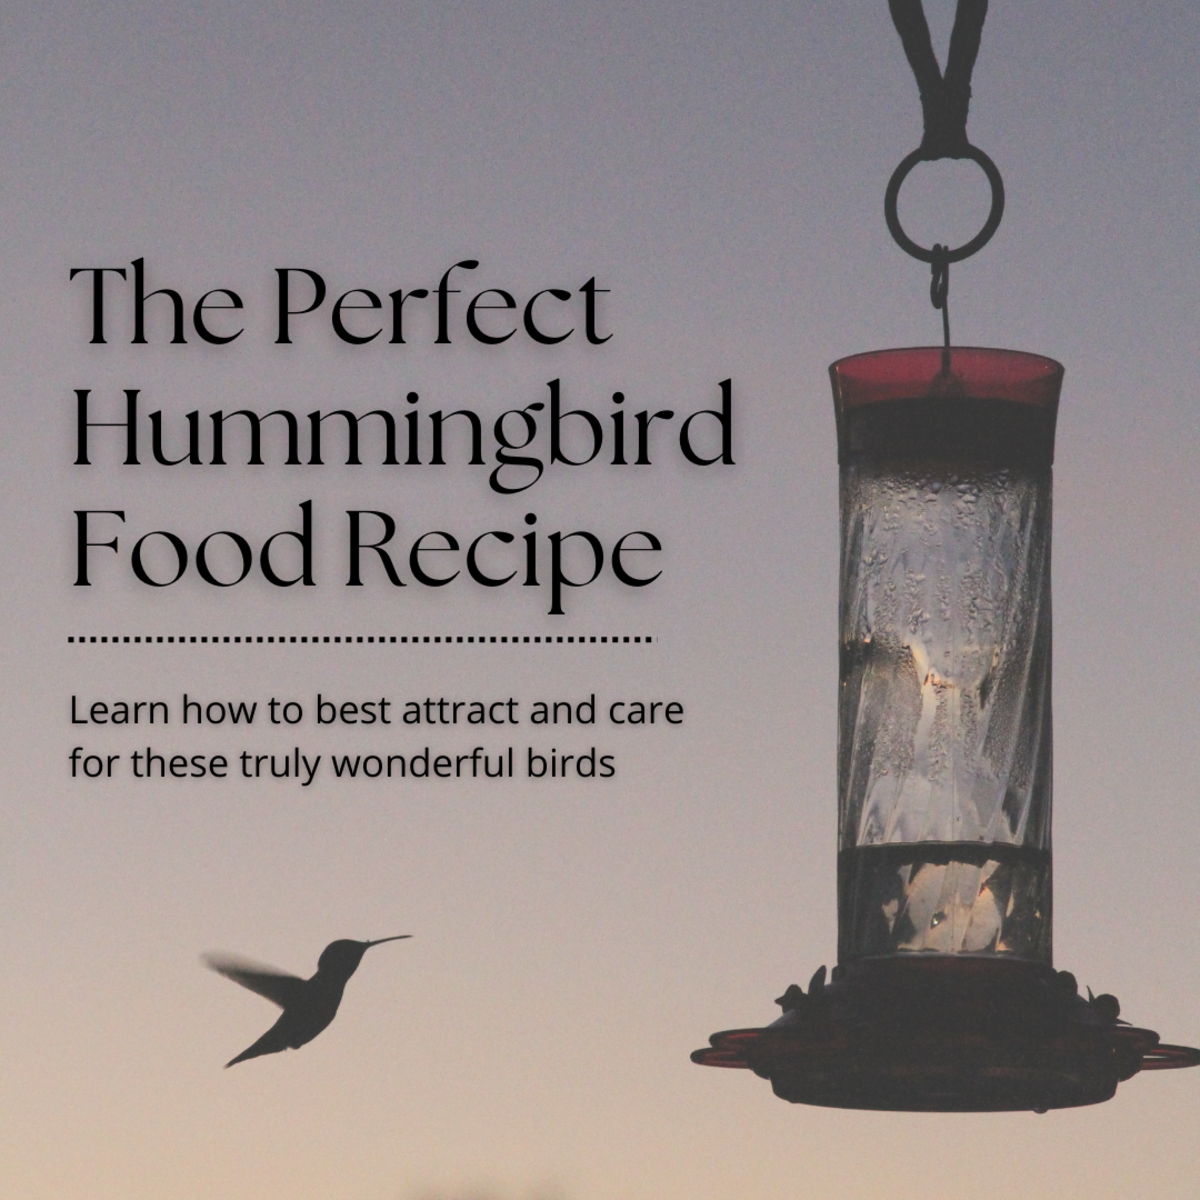 This guide will provide the perfect hummingbird food recipe, as well as tips for how to best care for these magnificent birds.